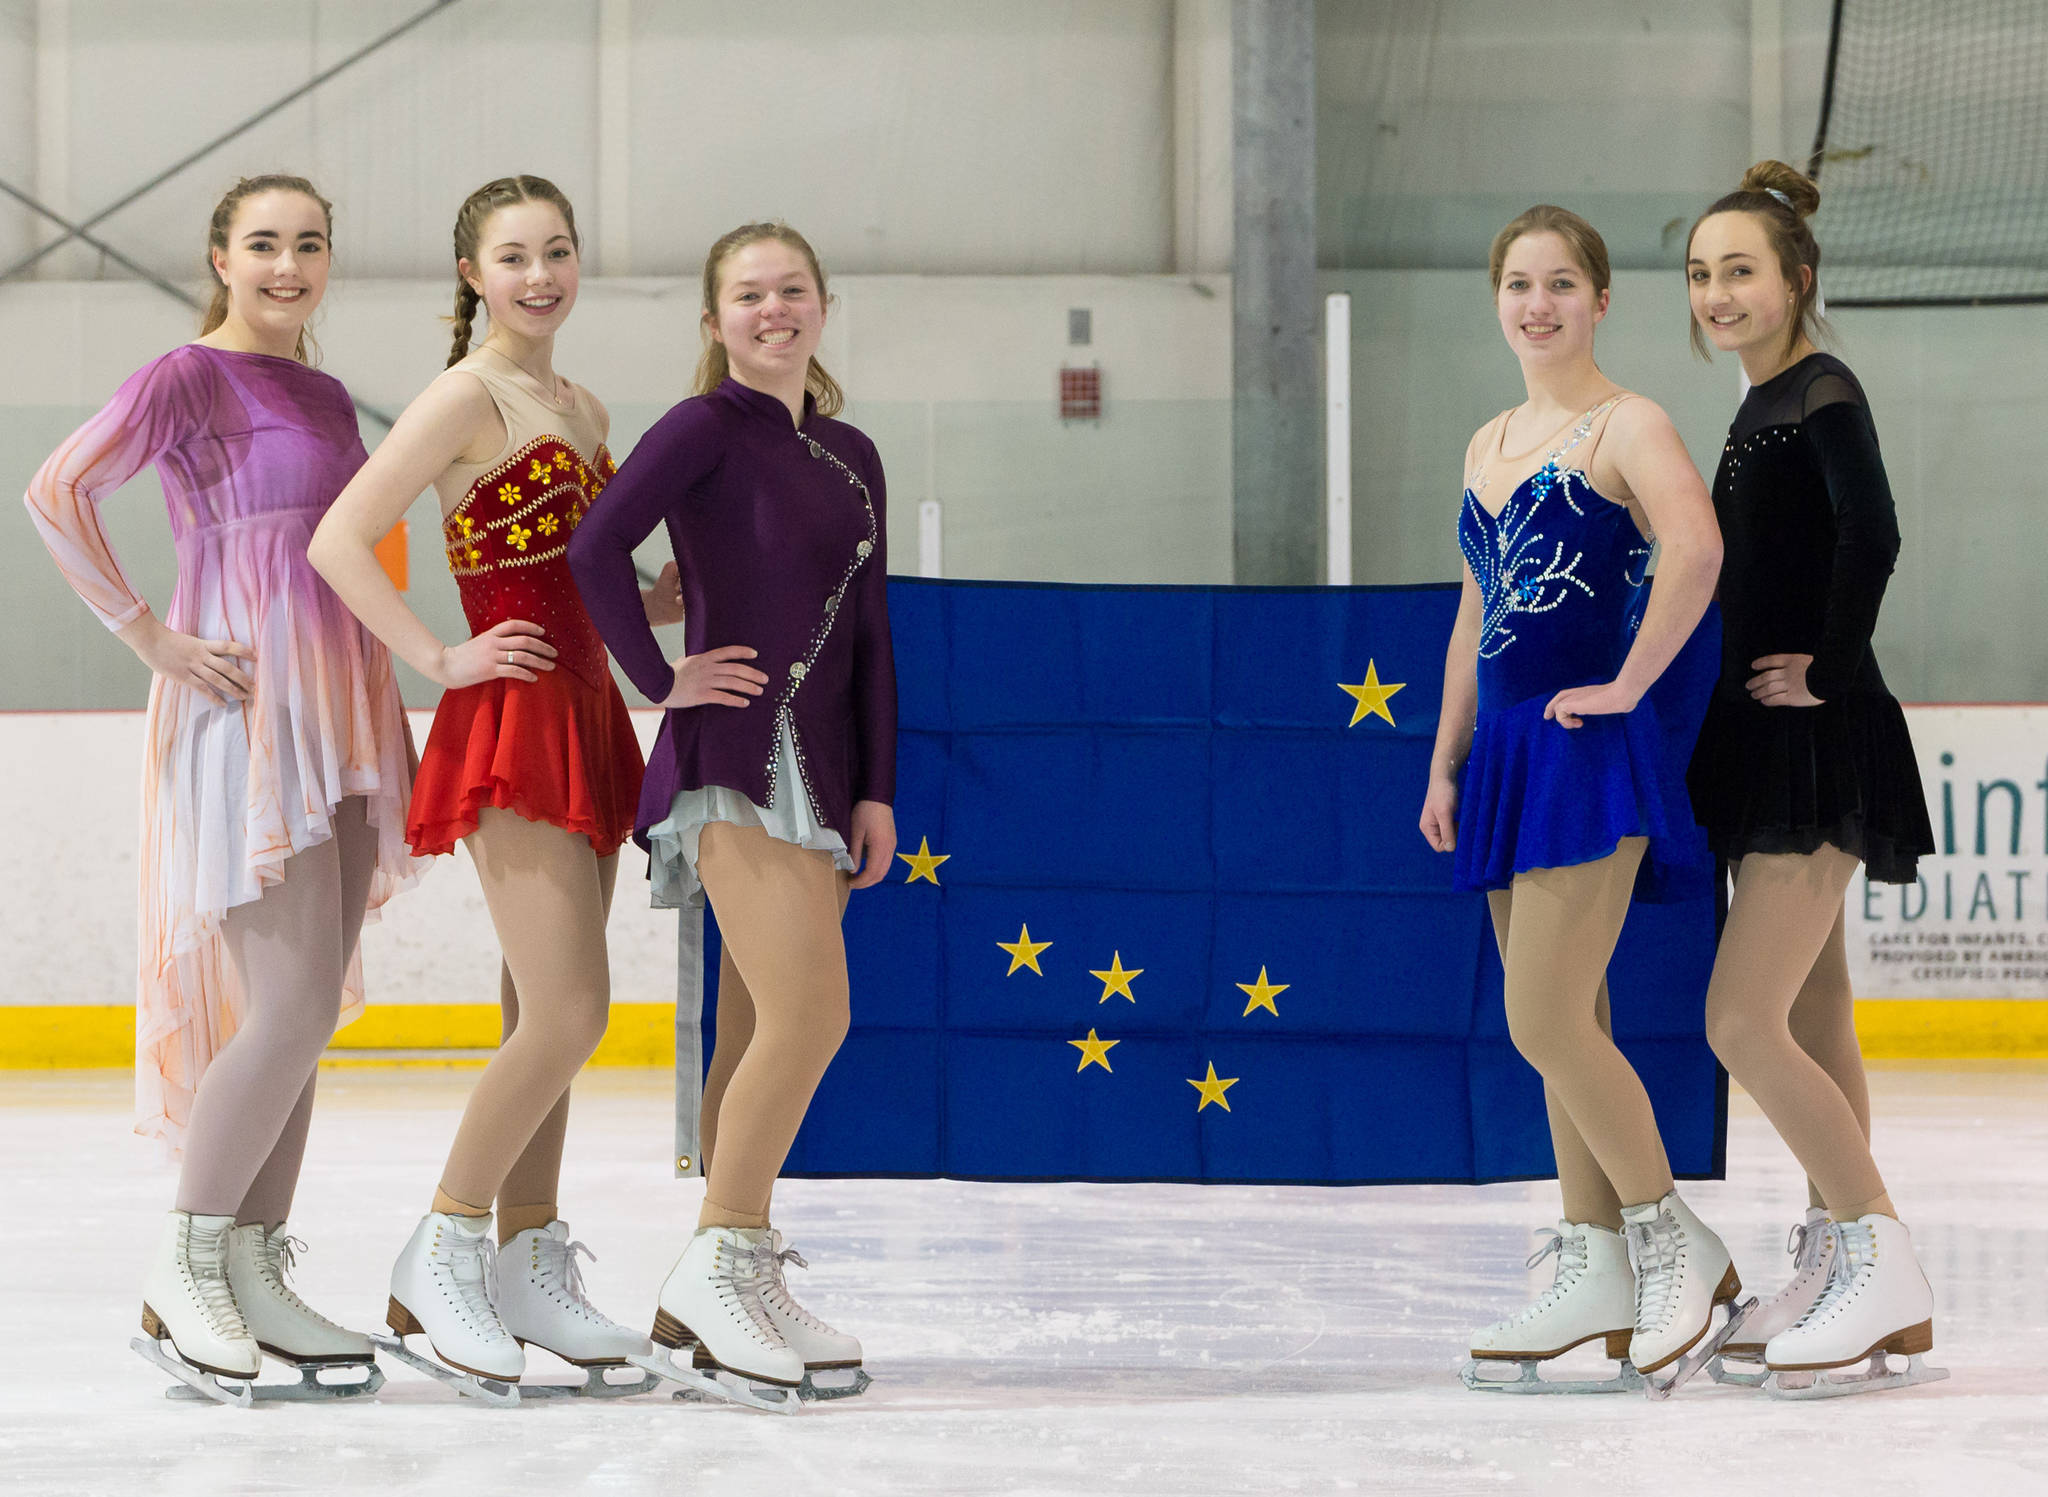 Five Juneau Skating Club members were selected for Team Alaska’s figure skating team for the upcoming Arctic Winter Games in Northwest Territories. L to R: Emily Bowman, Kara Hort, Meredith Fritsch, Katherine Fritsch, Haylee Hill. (Courtesy photo | Kim Hort)